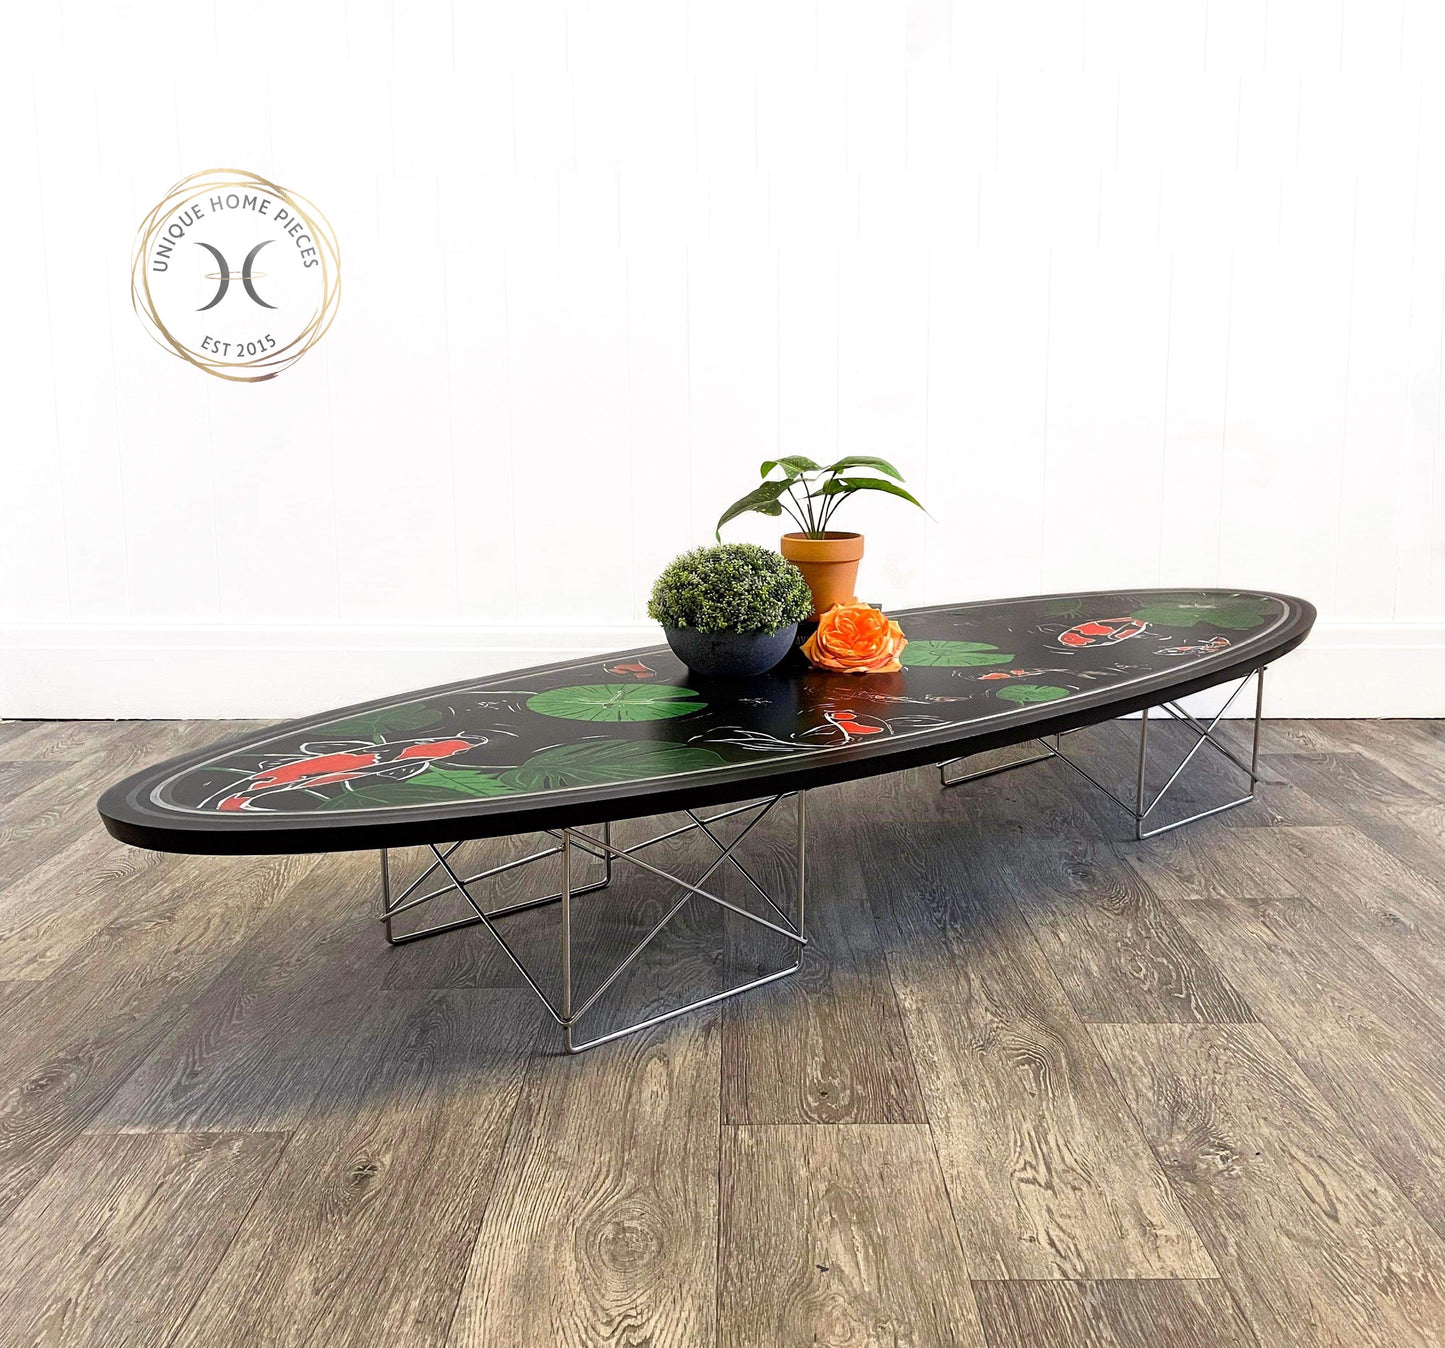 Eames Surfboard Low coffee table with metal leg design low to the floor. Black with a hand painted design applied to the top featuring koi carp in different sizes outlines in with with orange colouring, green pond green flora with insects and a dragonflies..Black grey and silver stripes around the edges to tie in with the chrome base .